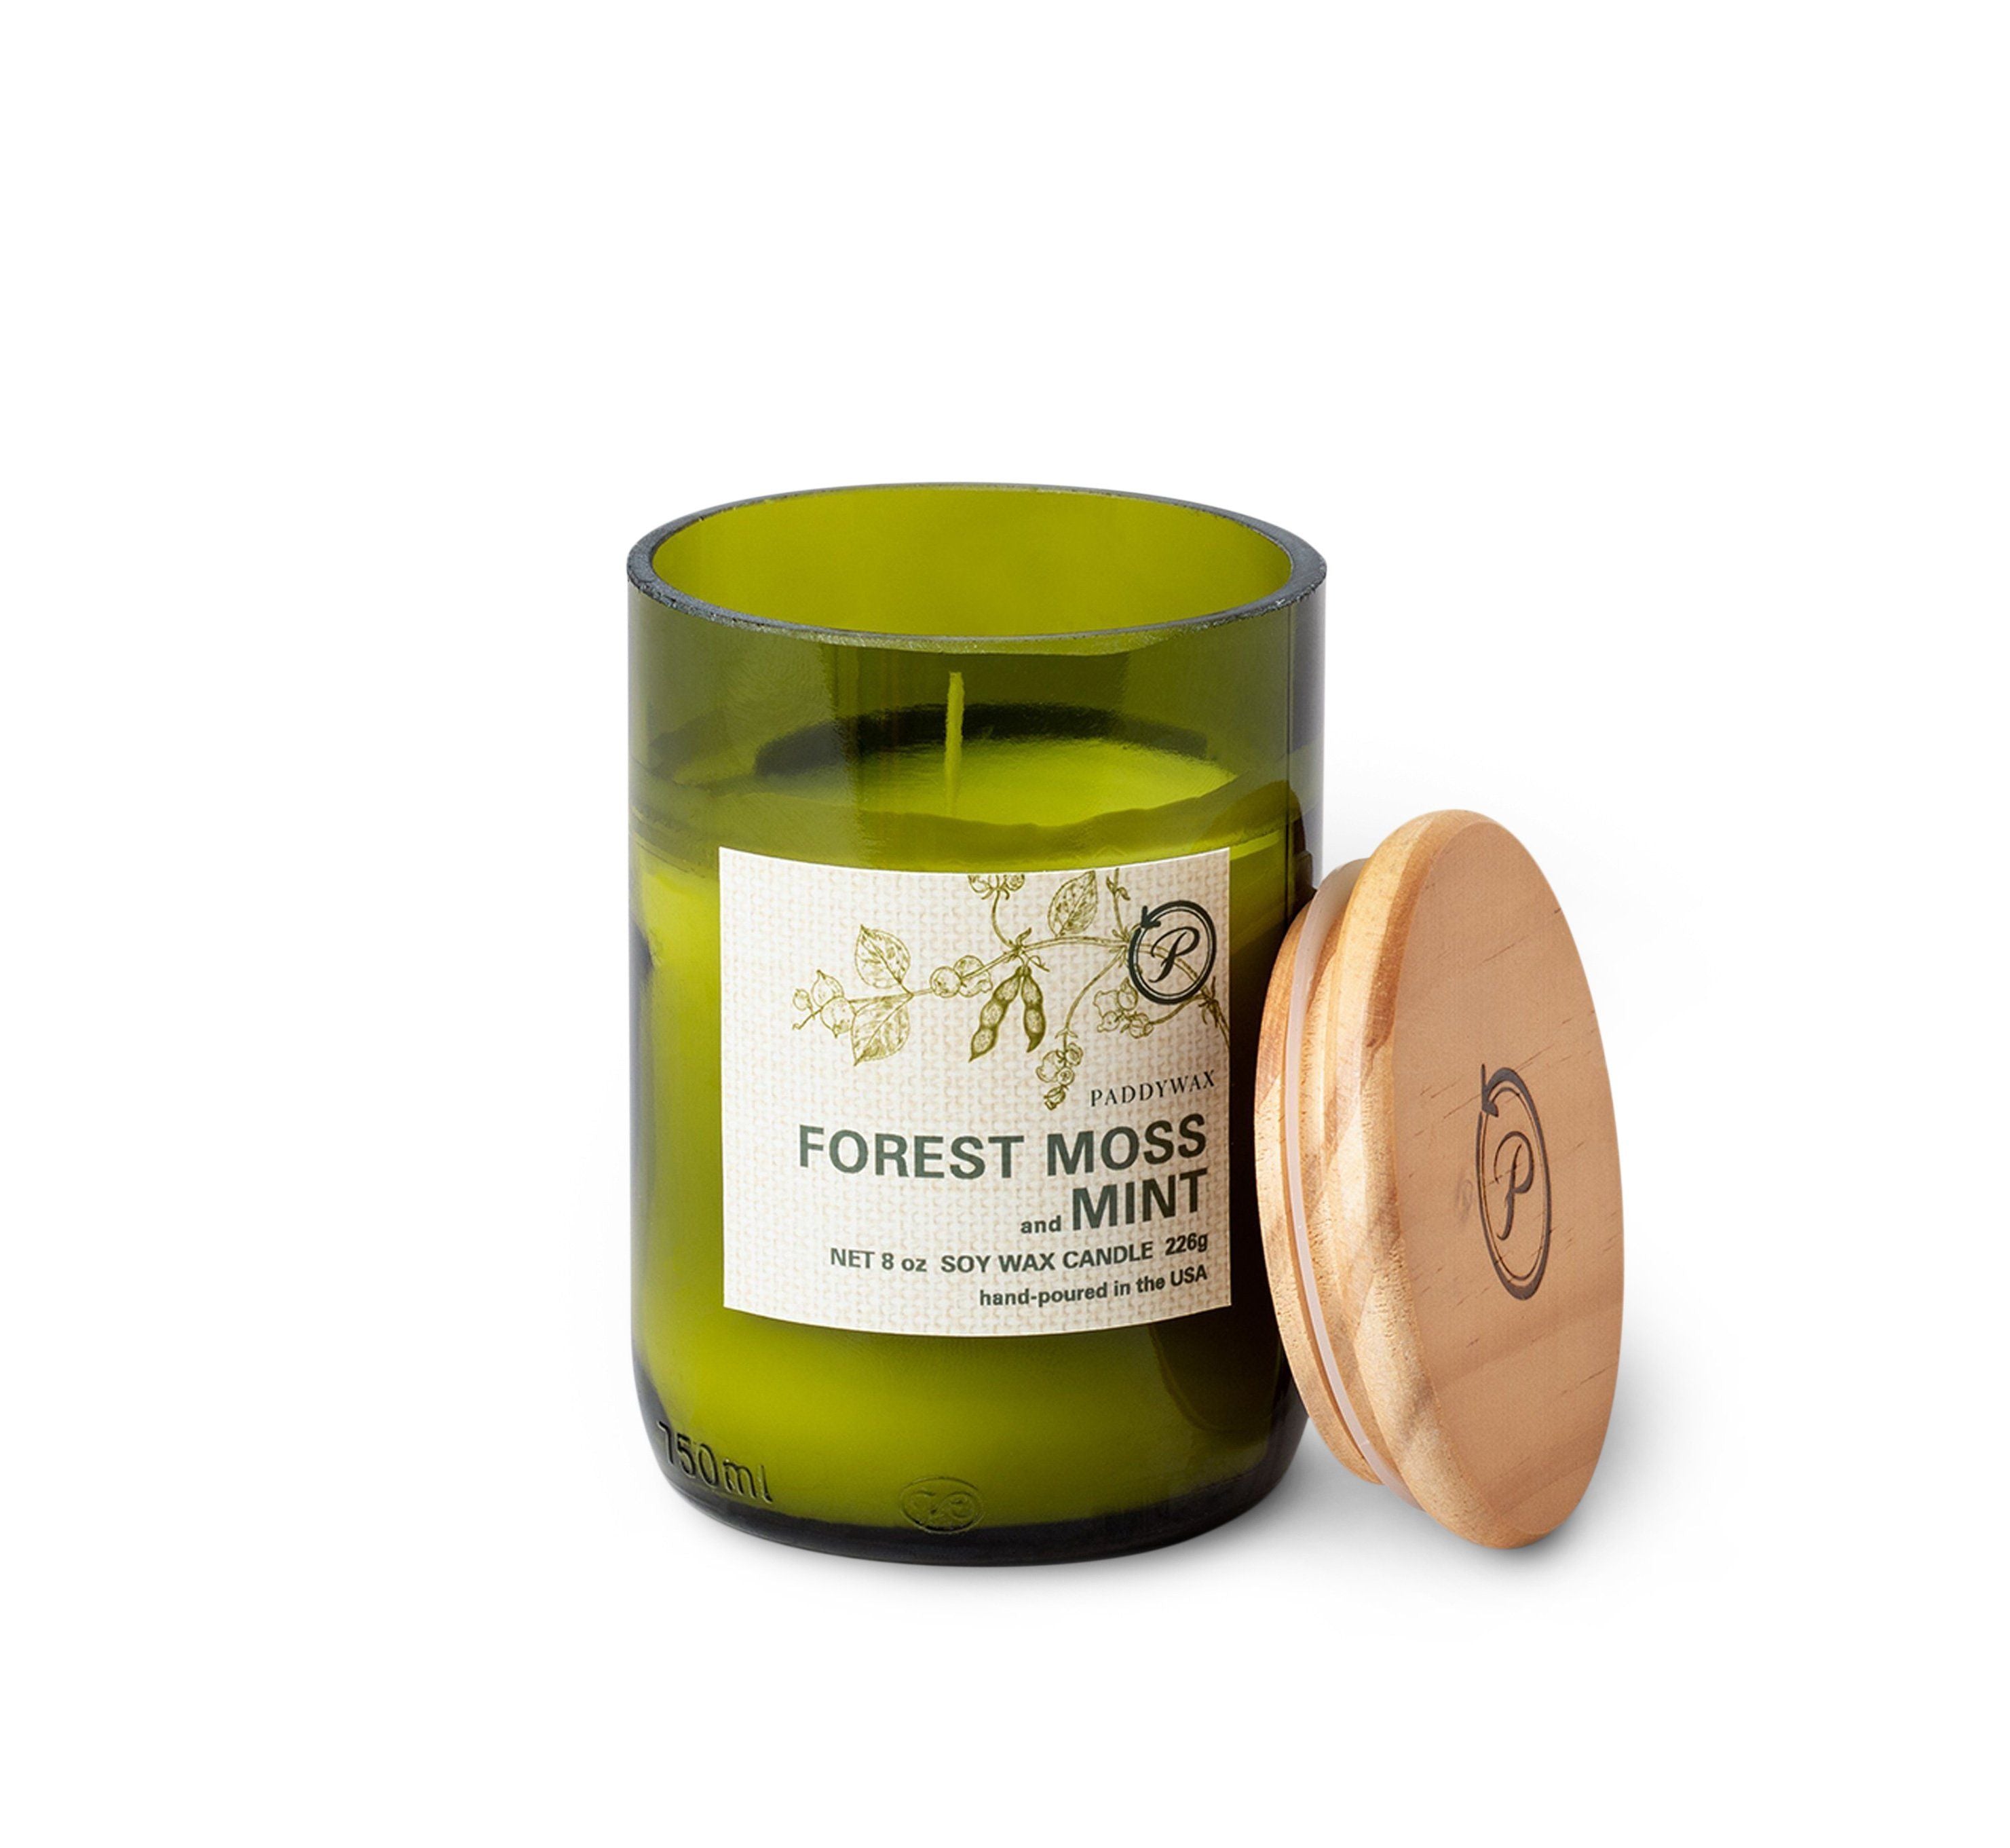 Paddywax Form Candle | Spanish Moss 6 oz